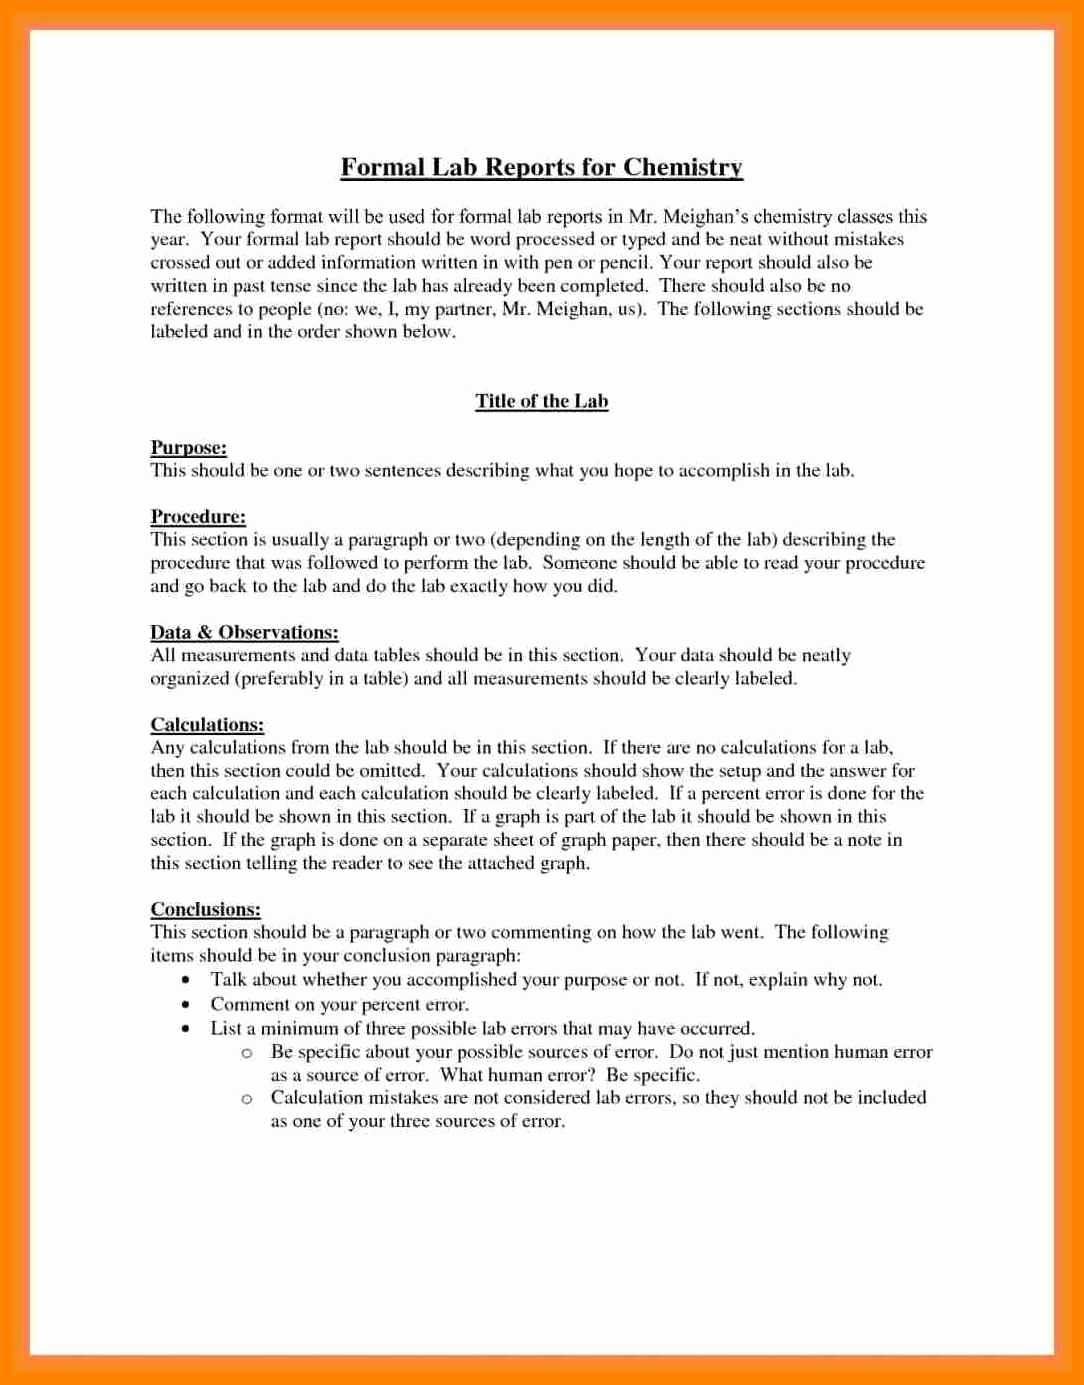 003 Formal Lab Report Example Best Write Up Template Of Pertaining To Chemistry Lab Report Template